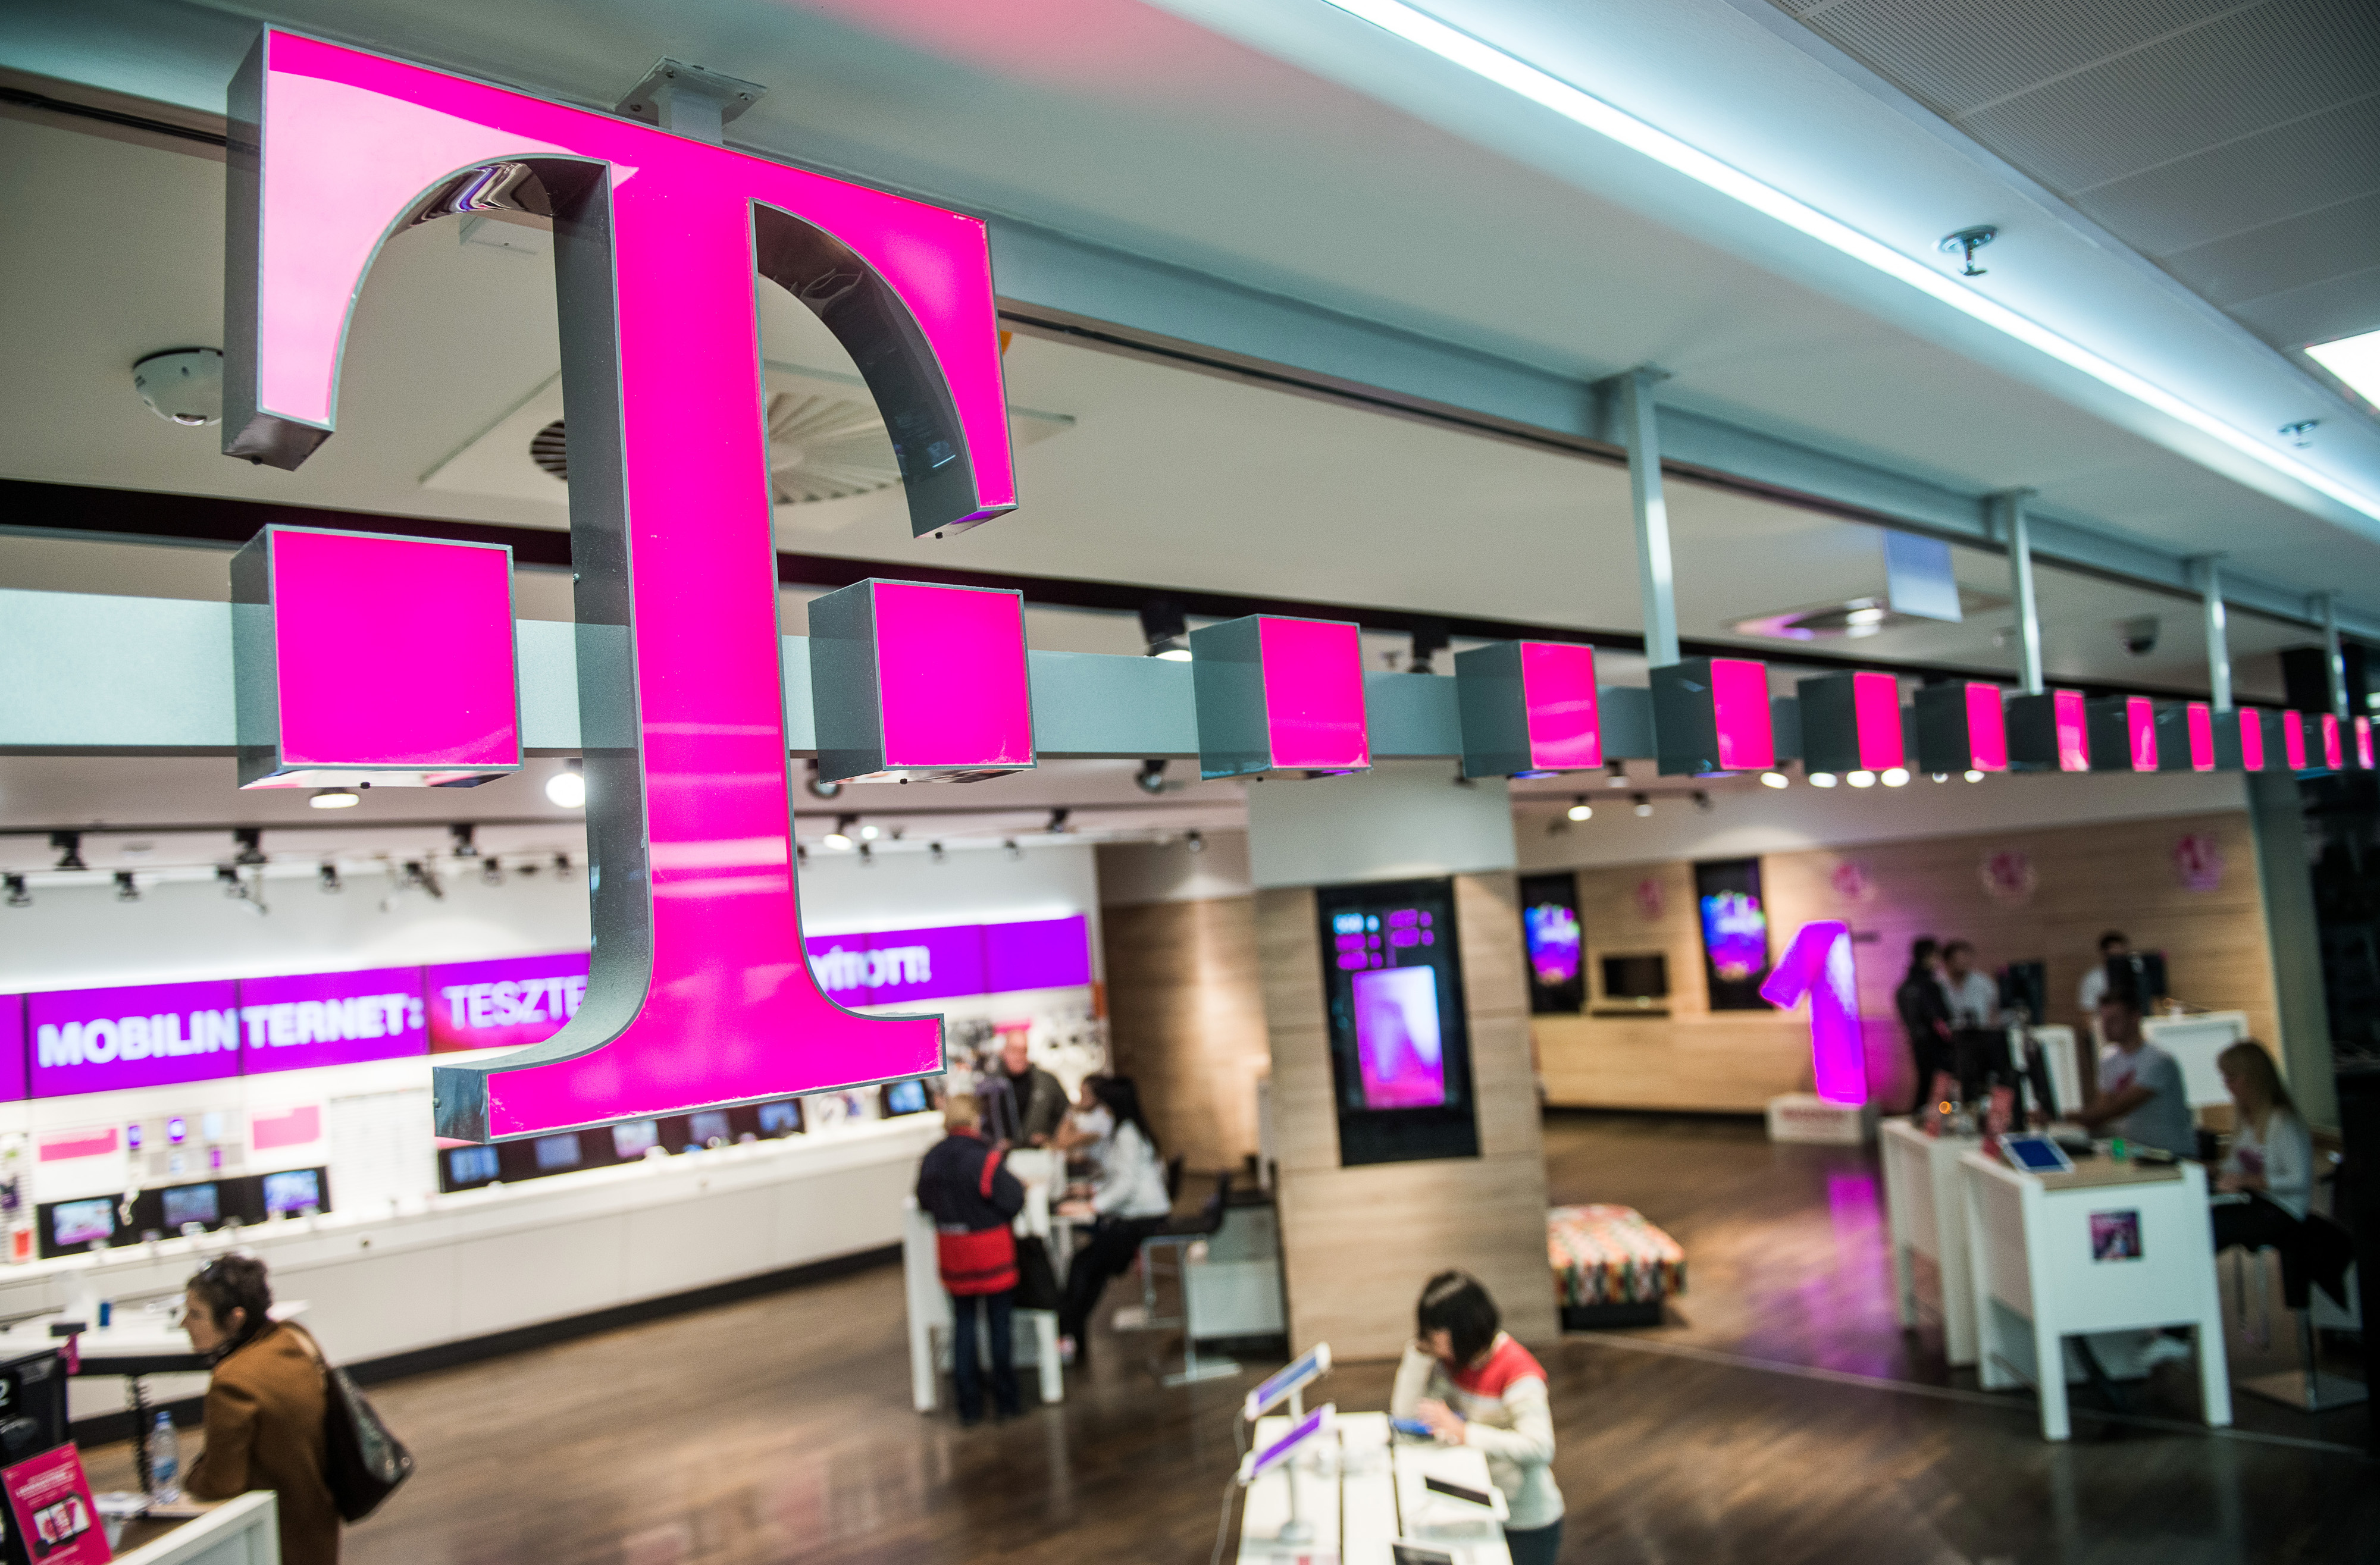 Customers browse mobile phone handsets as a sign sits above the entrance to a T-Mobile store, operated by Magyar Telekom Nyrt., in Budapest, Hungary, on Monday, Nov. 2, 2015. (Bloomberg&mdash;Bloomberg via Getty Images)